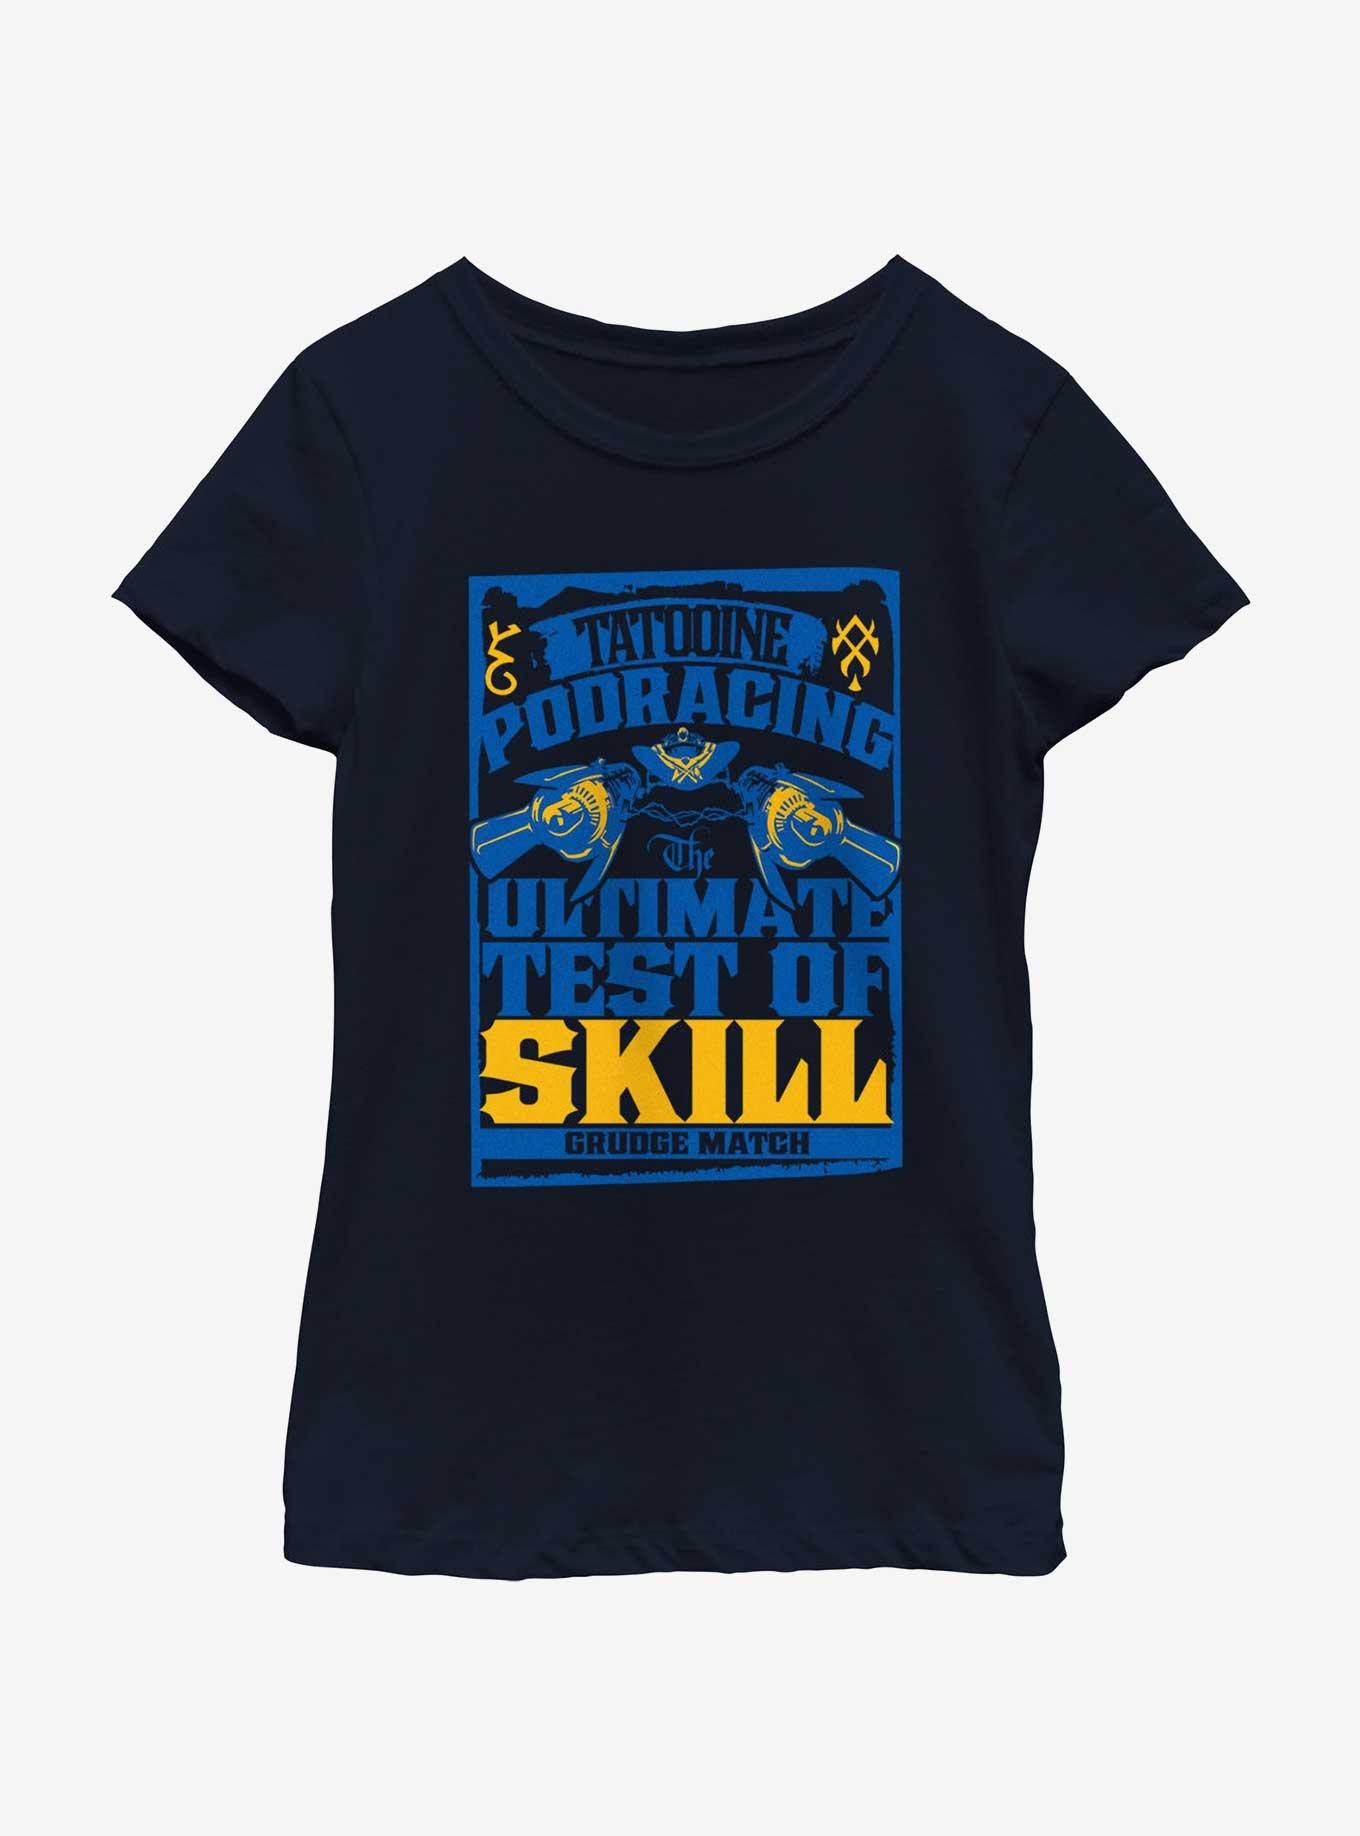 Star Wars Pod Racing Ultimate Test Of Skill Youth Girls T-Shirt, NAVY, hi-res